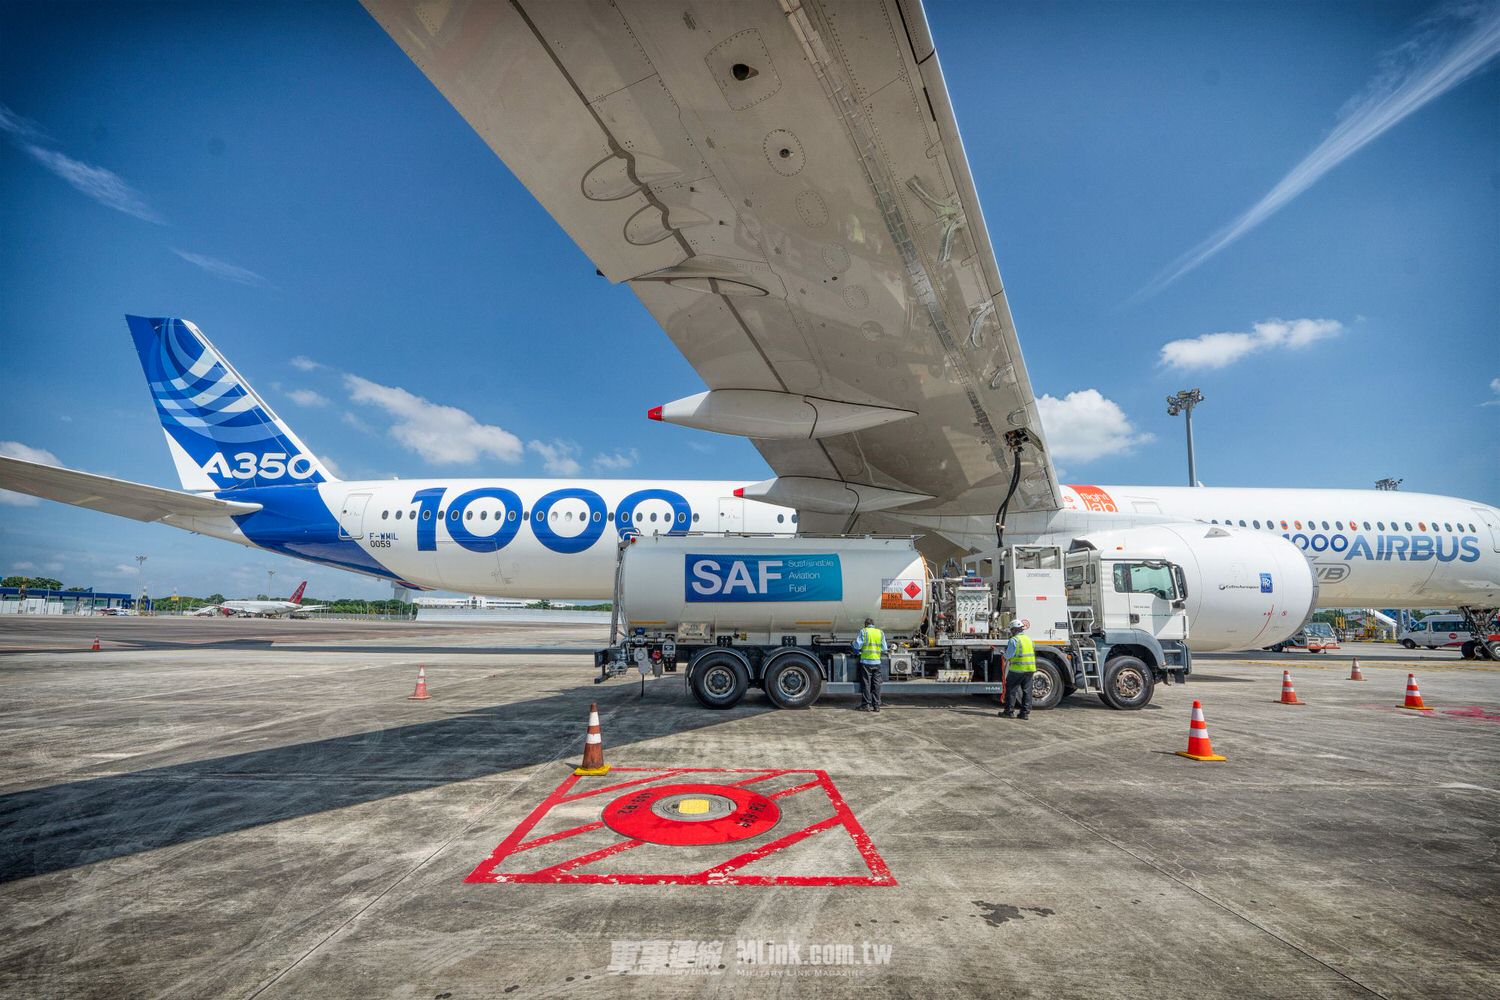 20230218 Airbus A350 1000 flies with SAF at Singapore Airshow 1